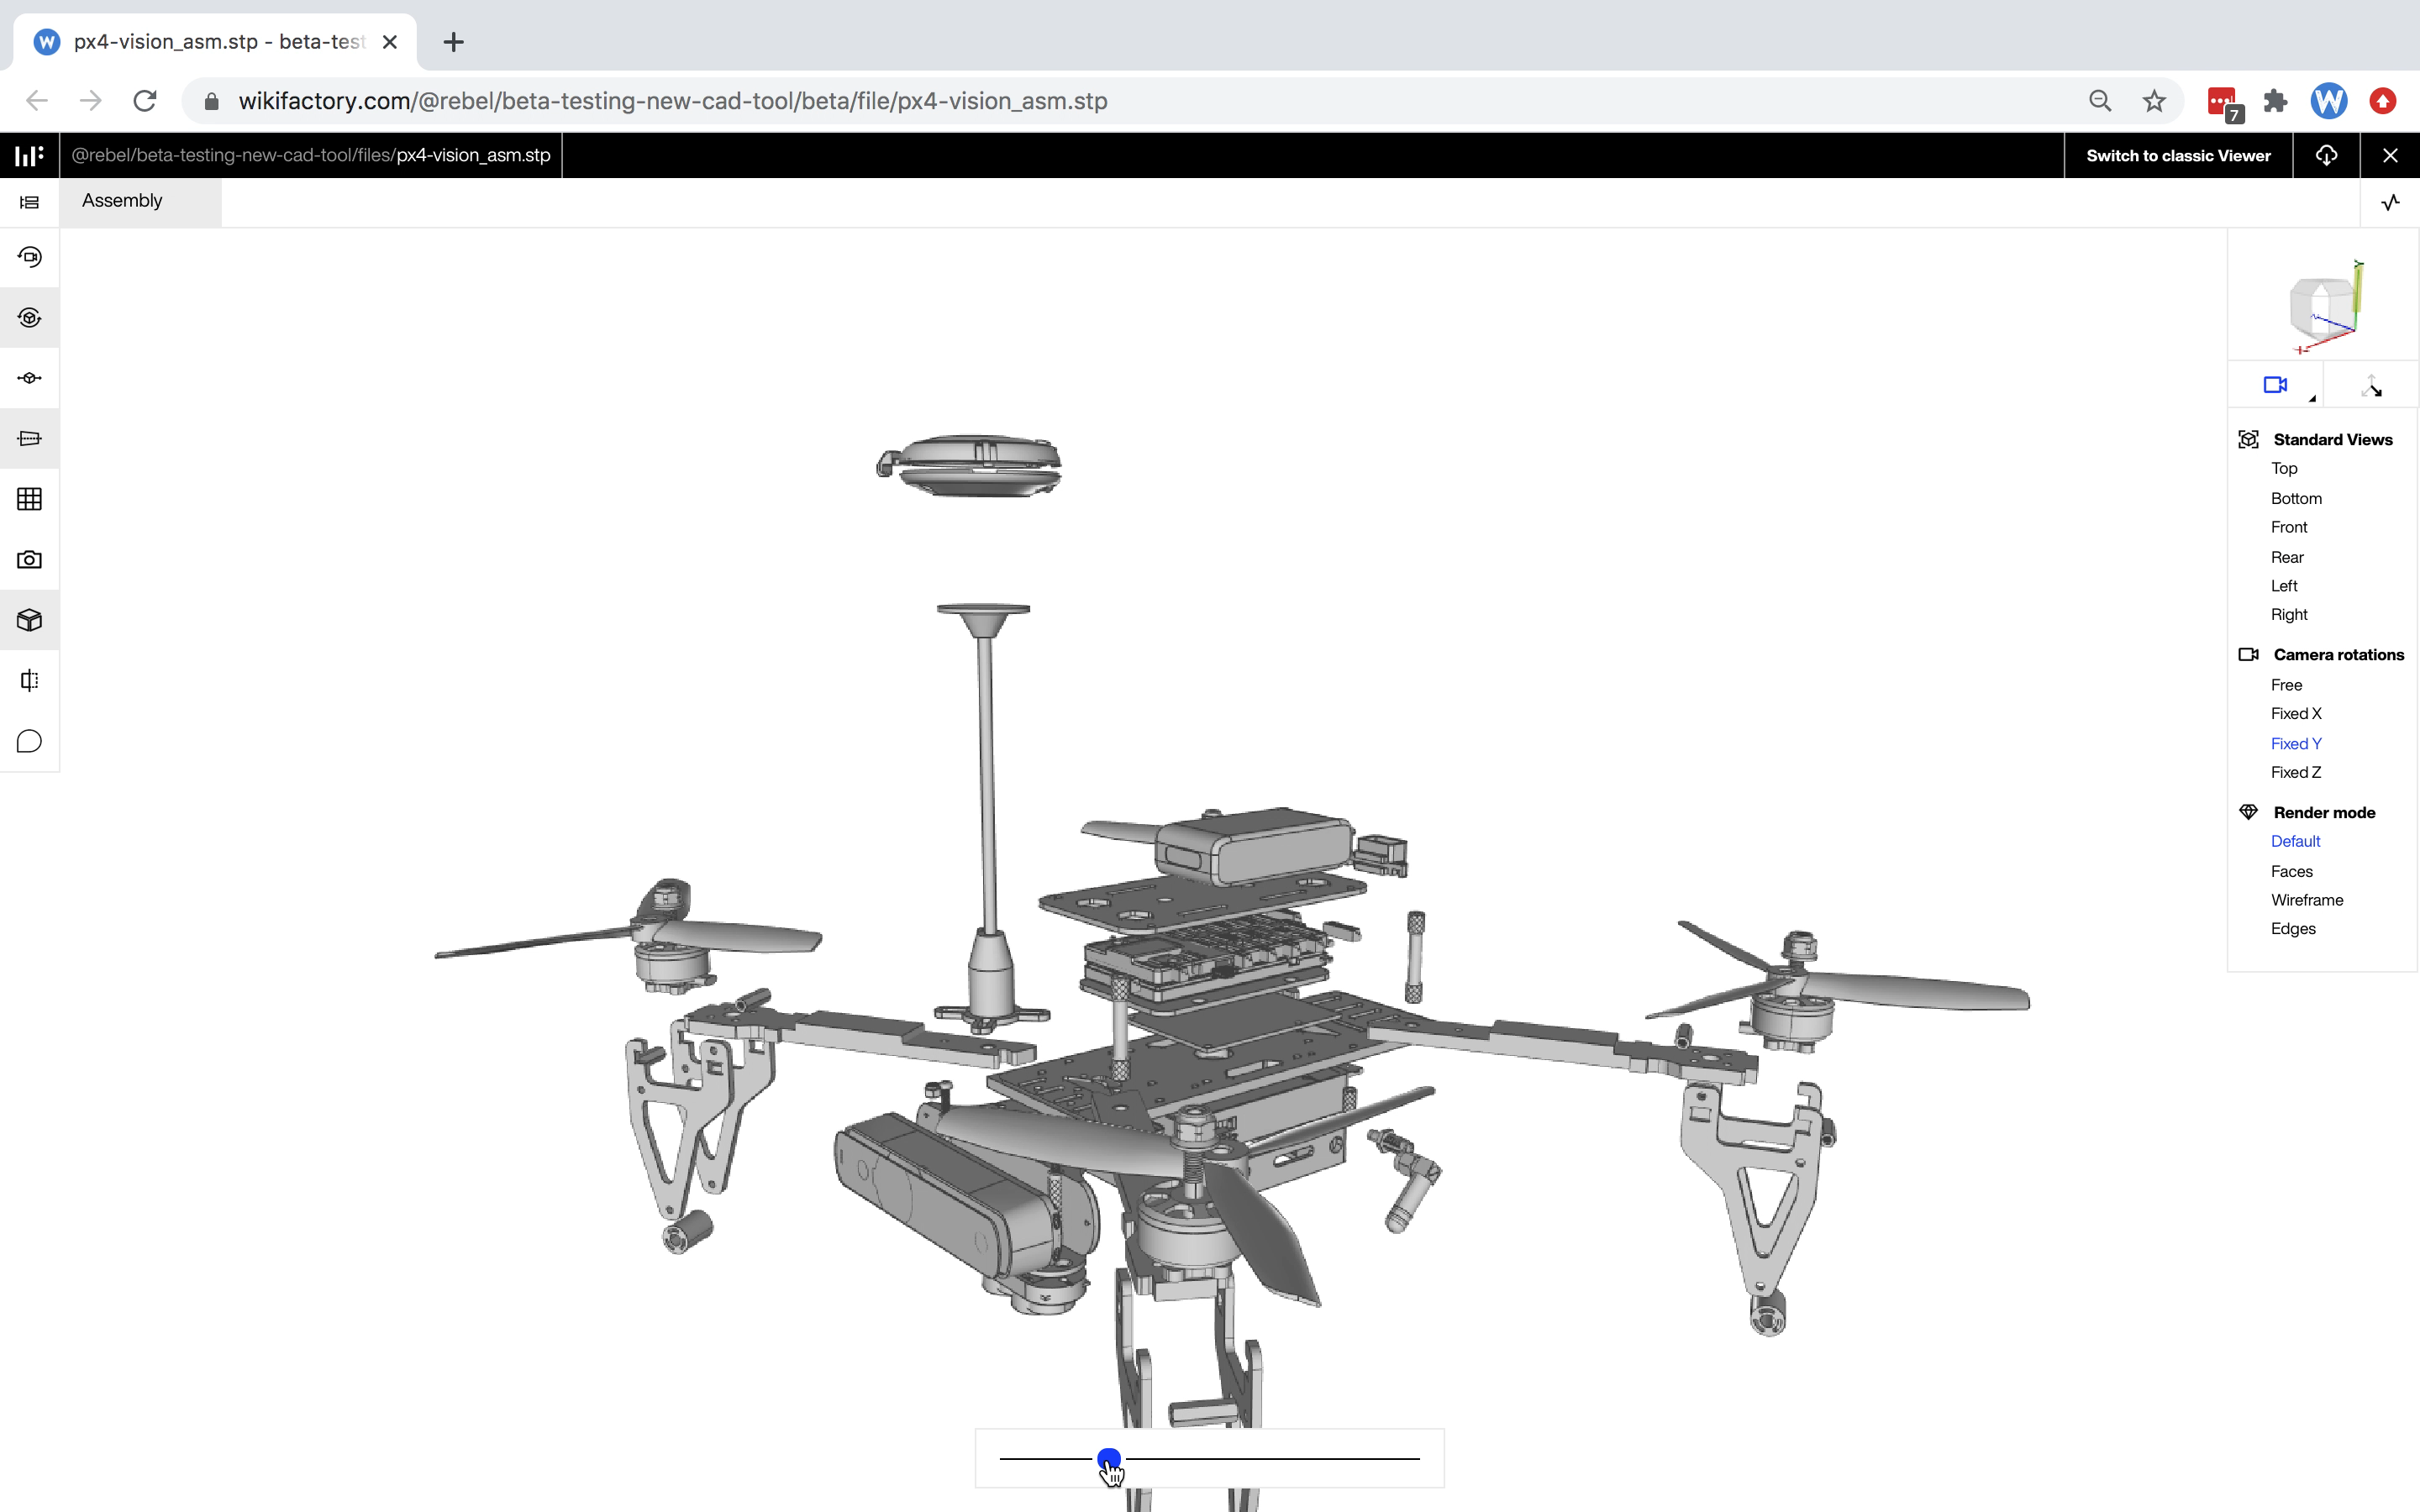 Wikifactory's new Collaborative CAD Tool. Image via Wikifactory.